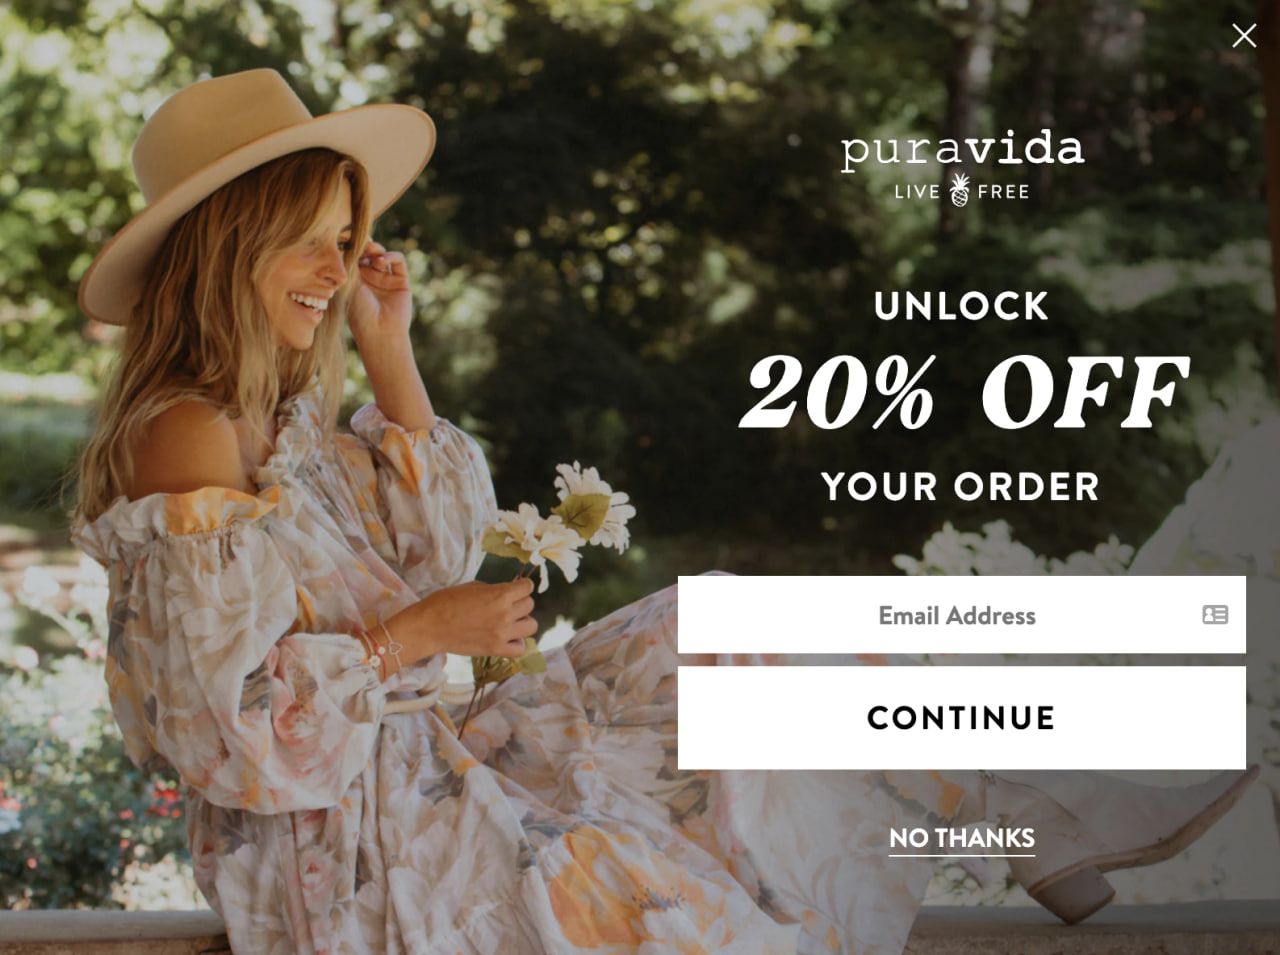 Puravida gives a 20% profit for ordering their jewels.